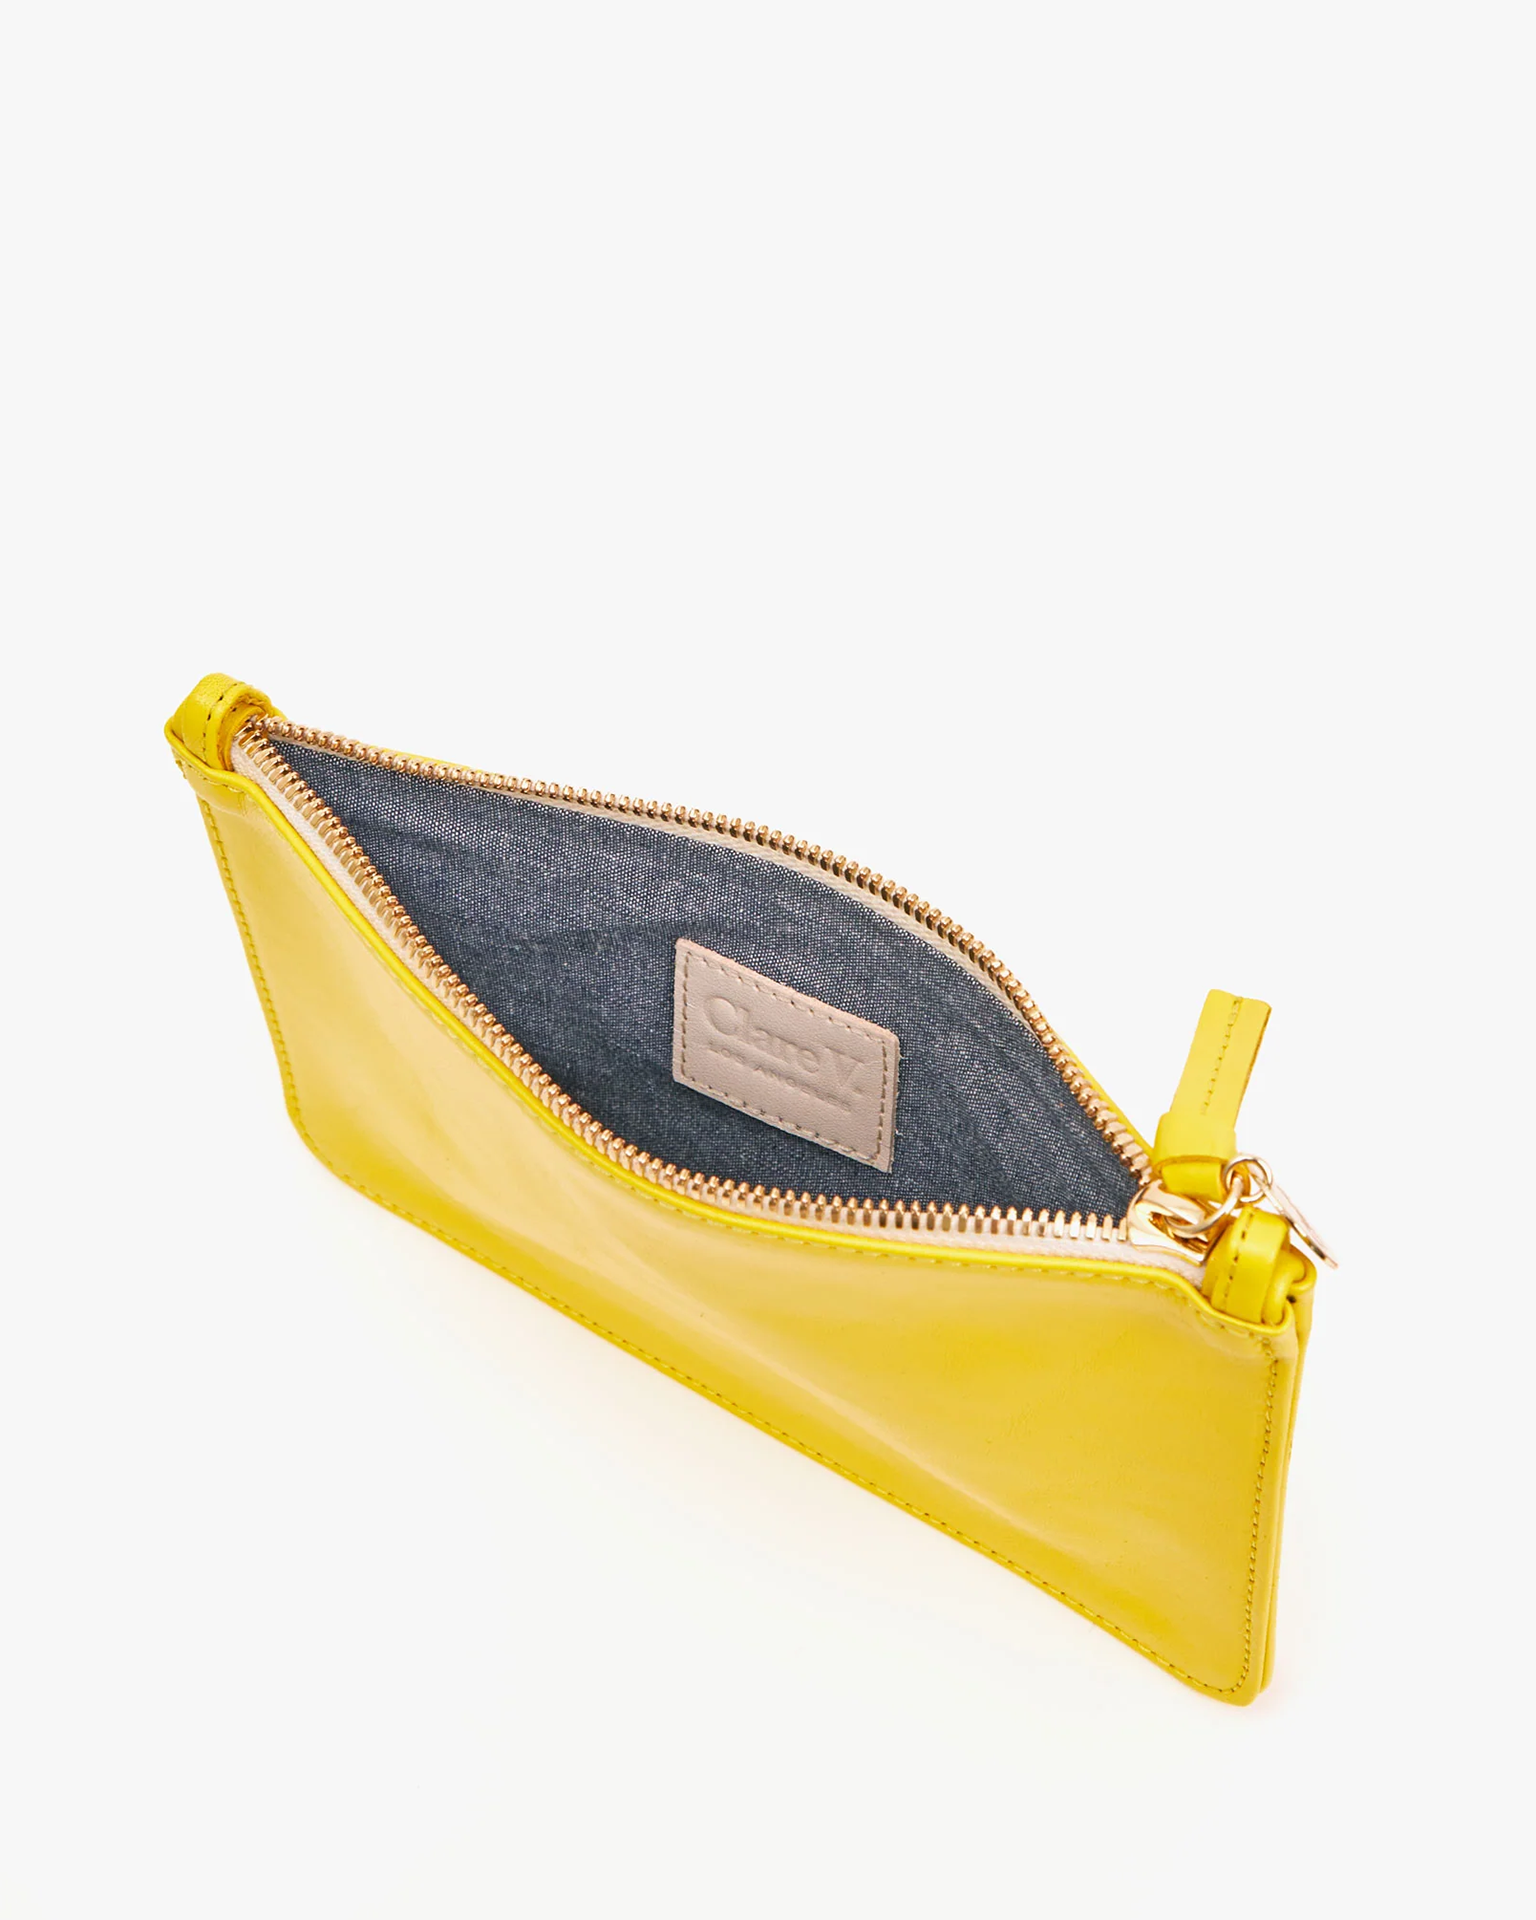 Stylish Ladies Handheld Bag with Sling + 1 Clutch purse in Mustard yellow :  Amazon.in: Fashion